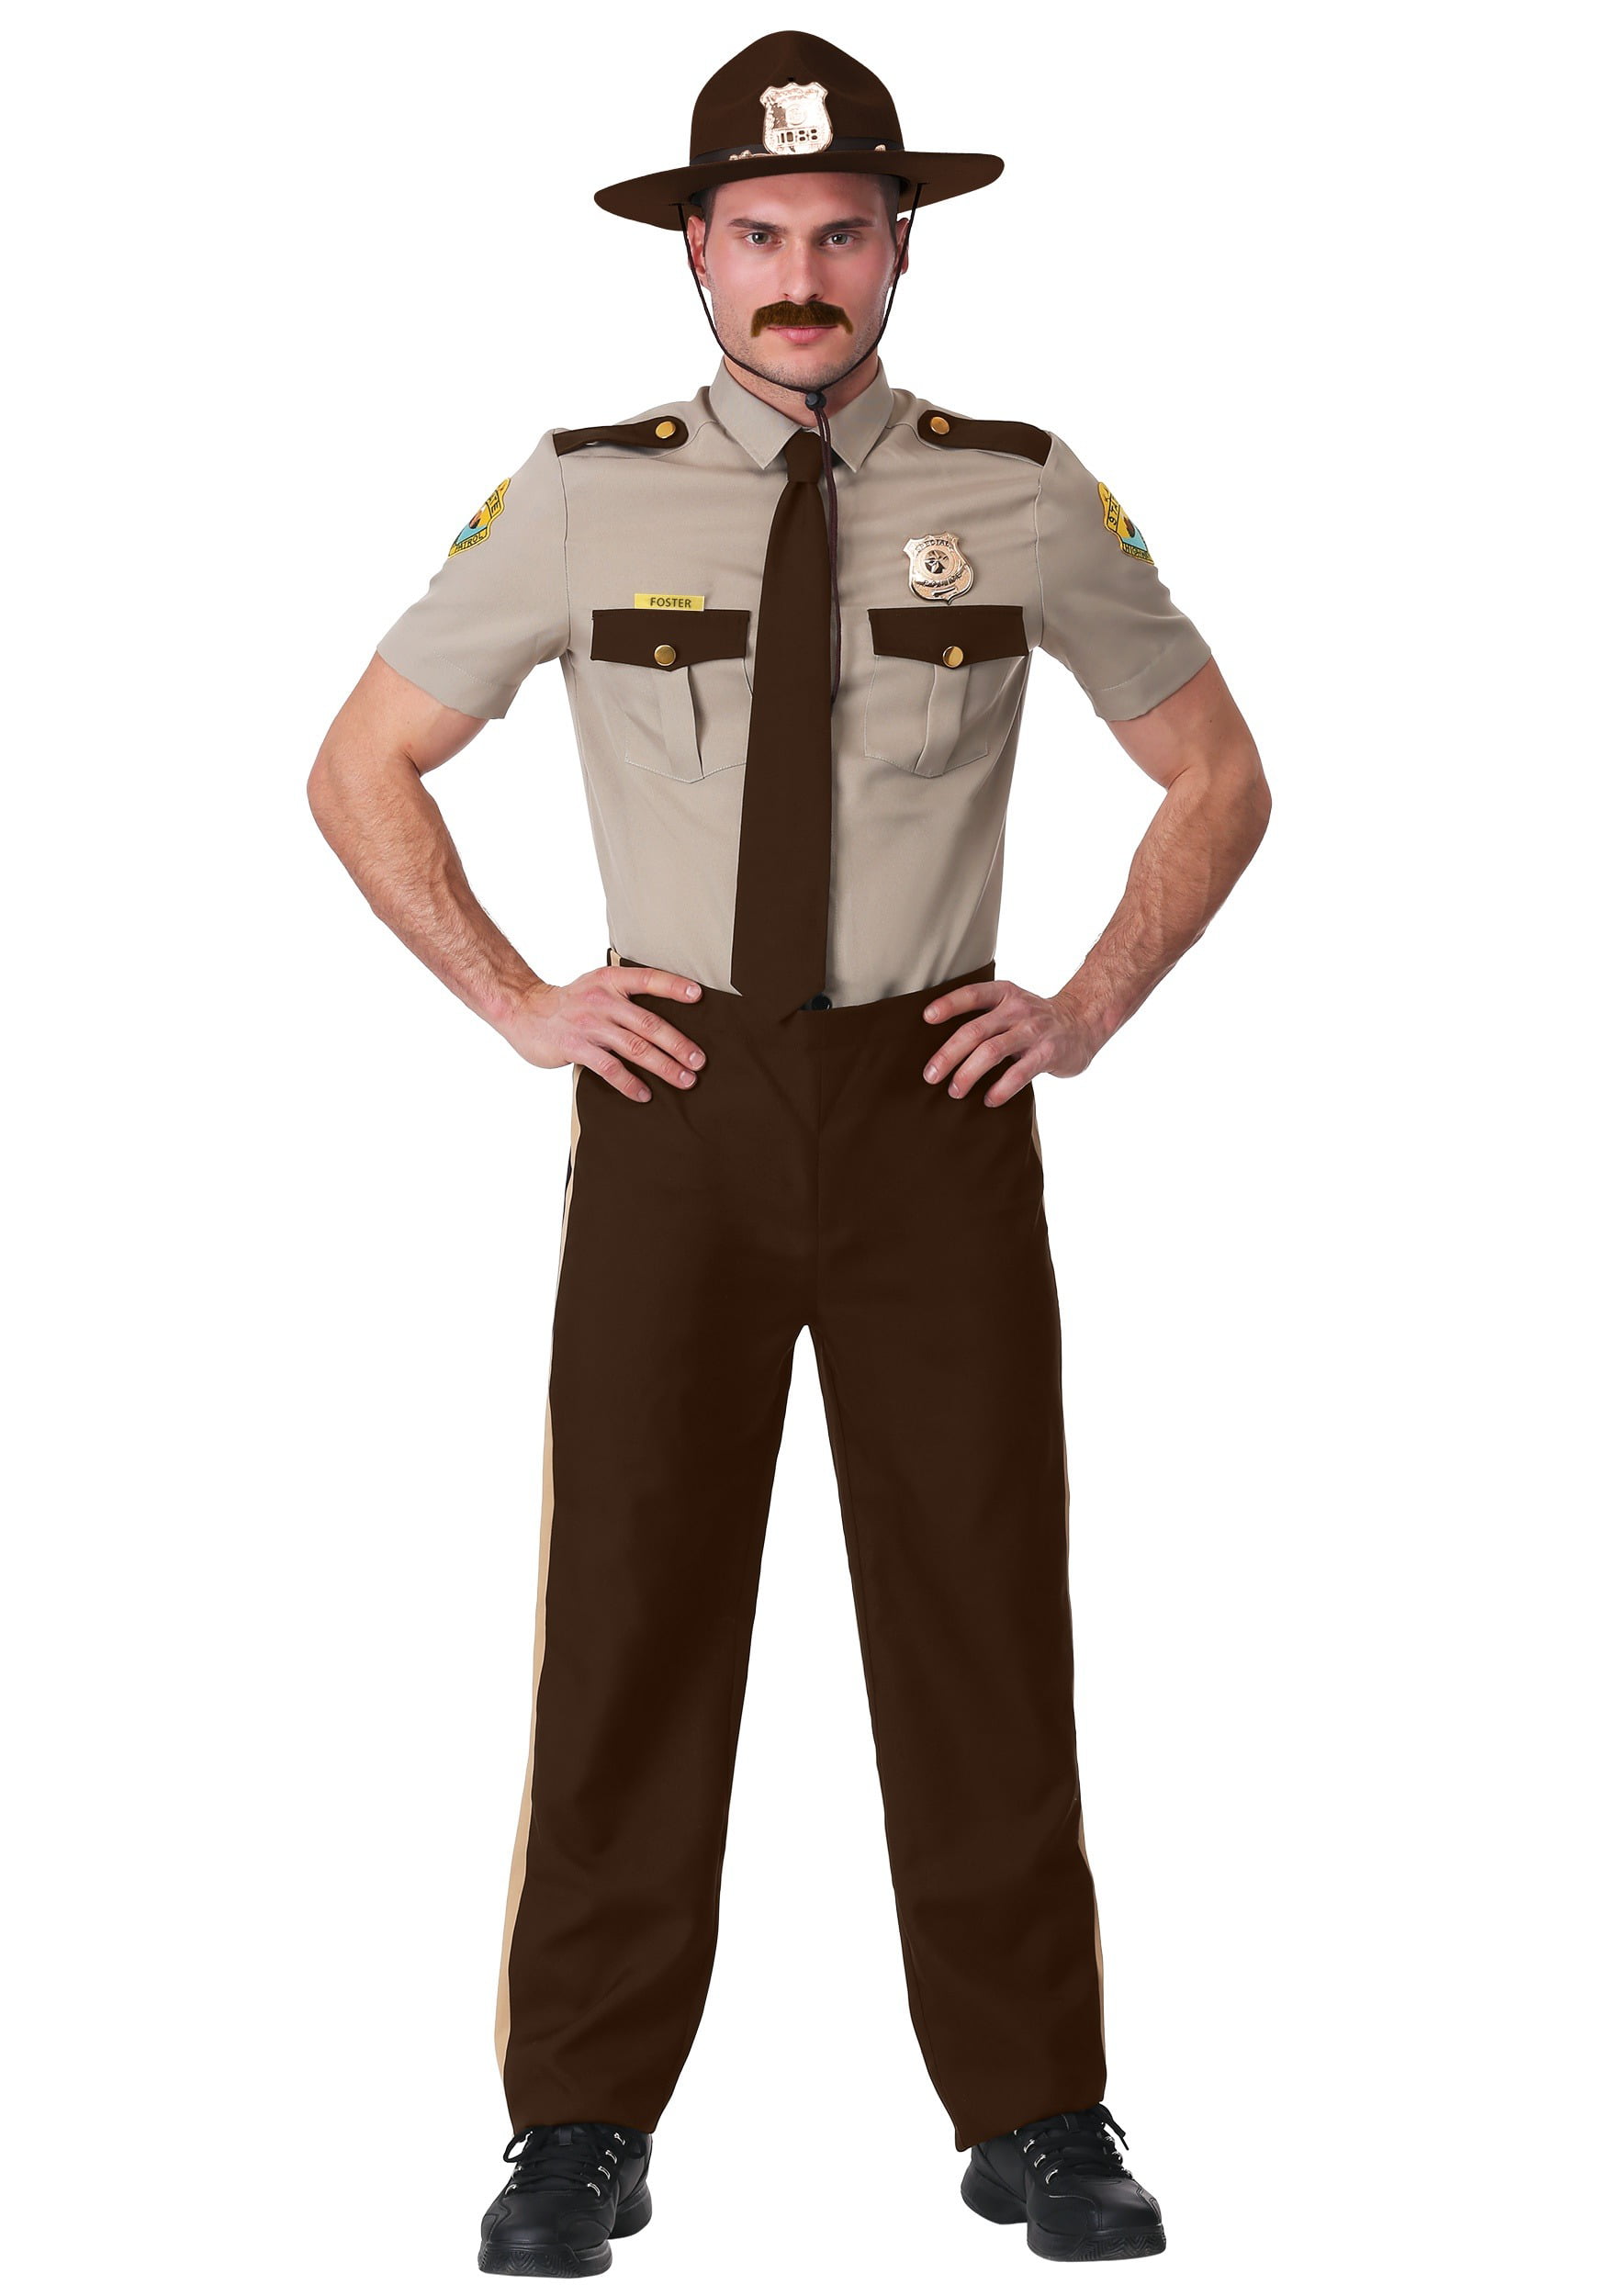 Details about  / State Trooper Police Cop Highway Patrol Fancy Dress Up Halloween Adult Costume